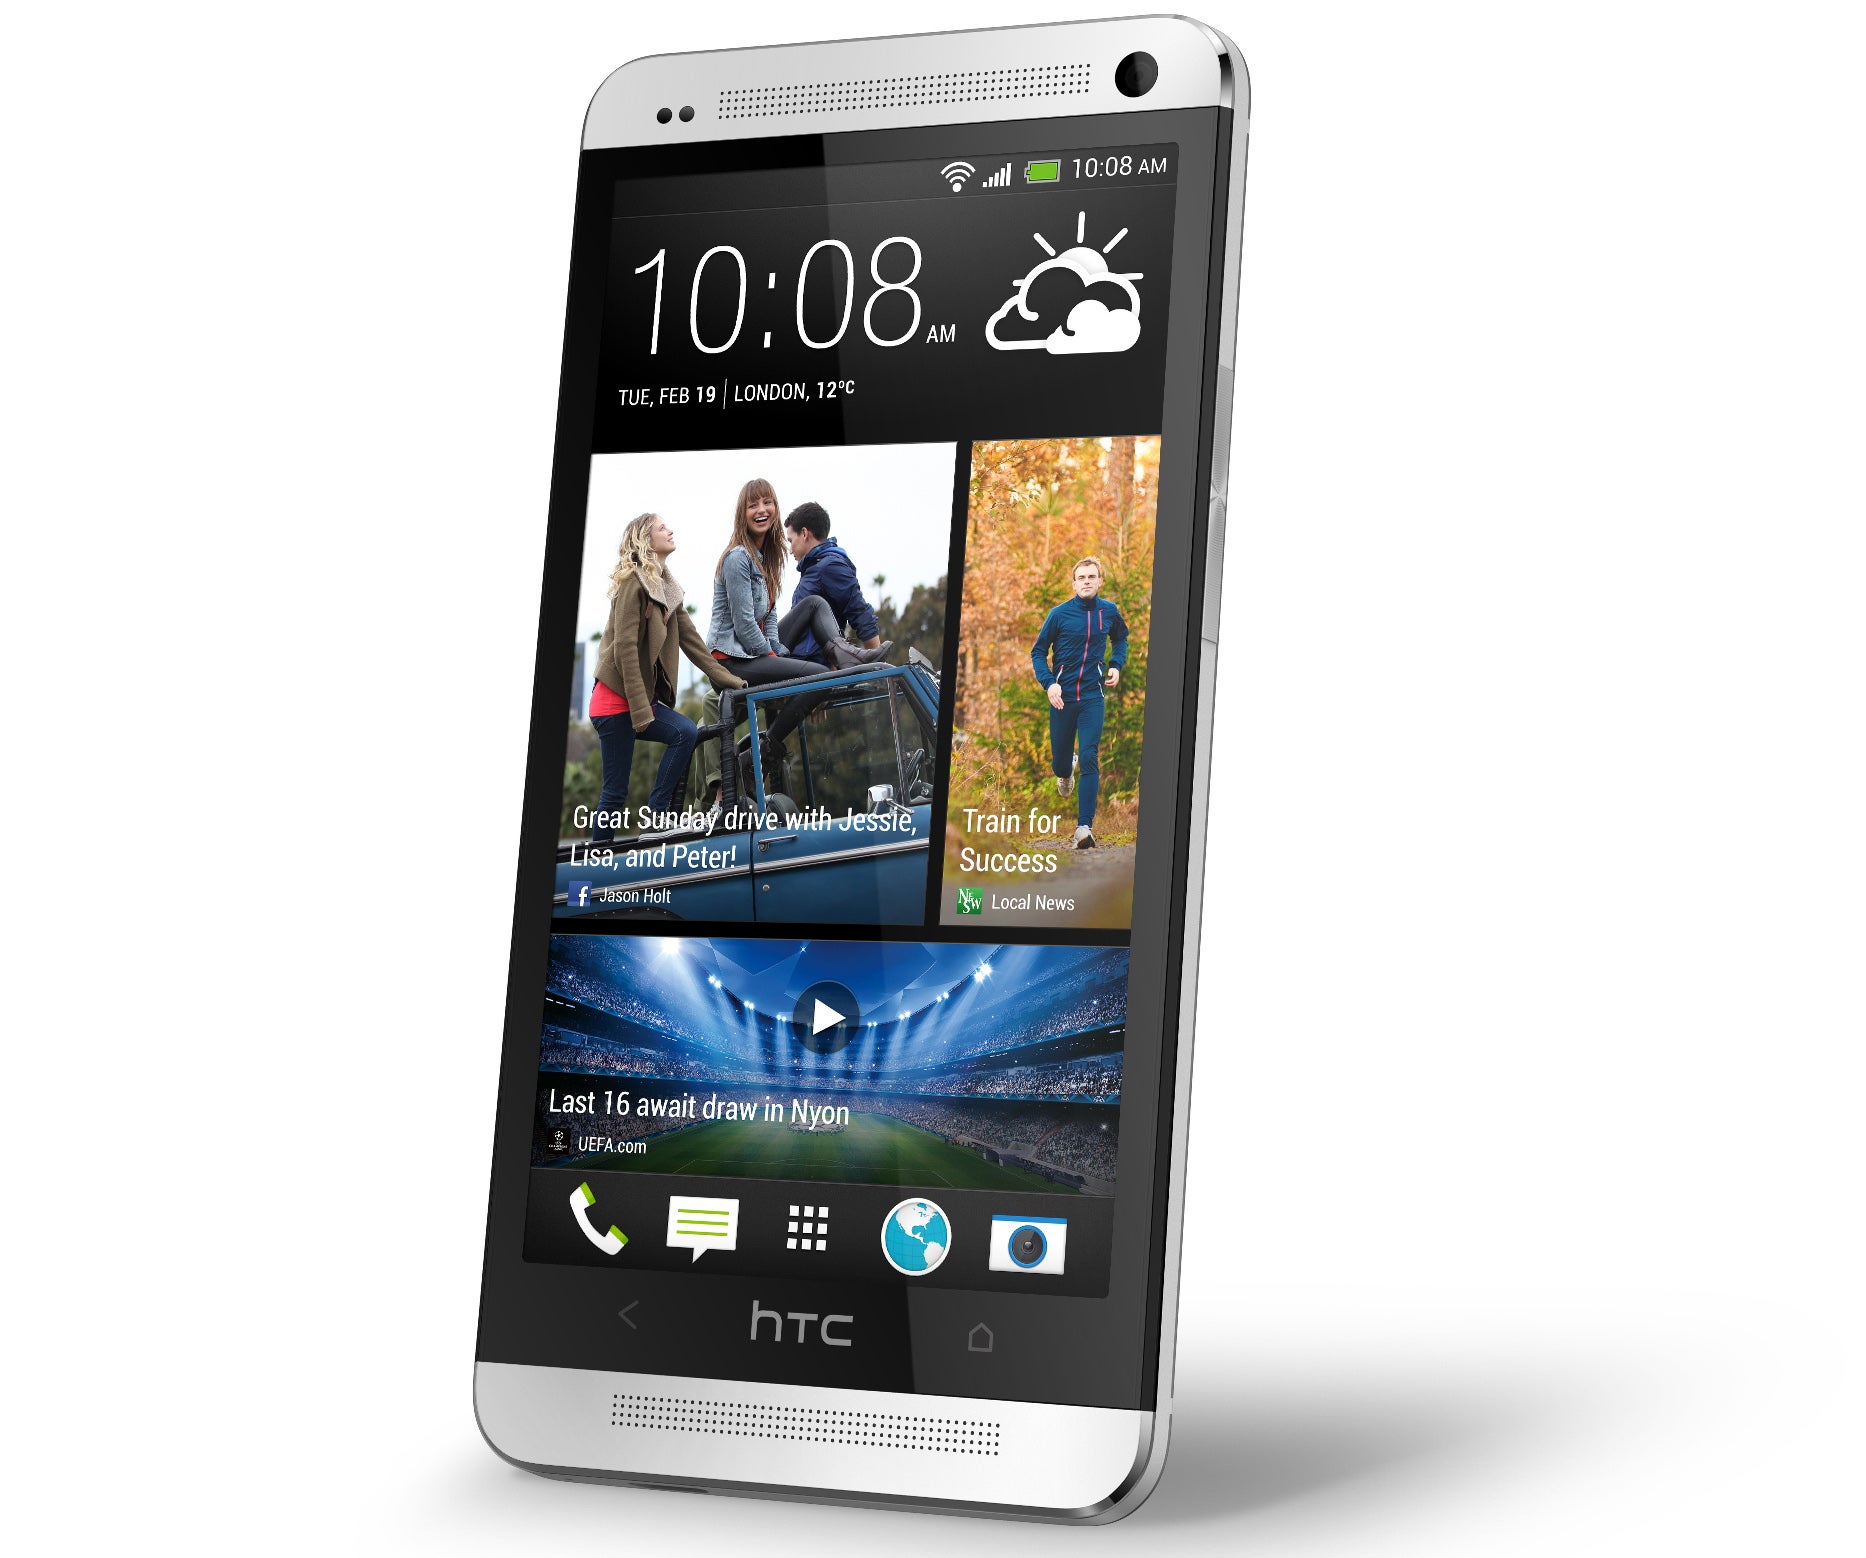 HTC could produce 2 million HTC One units next month - J.P. Morgan says HTC One production improving, shortages to end next month